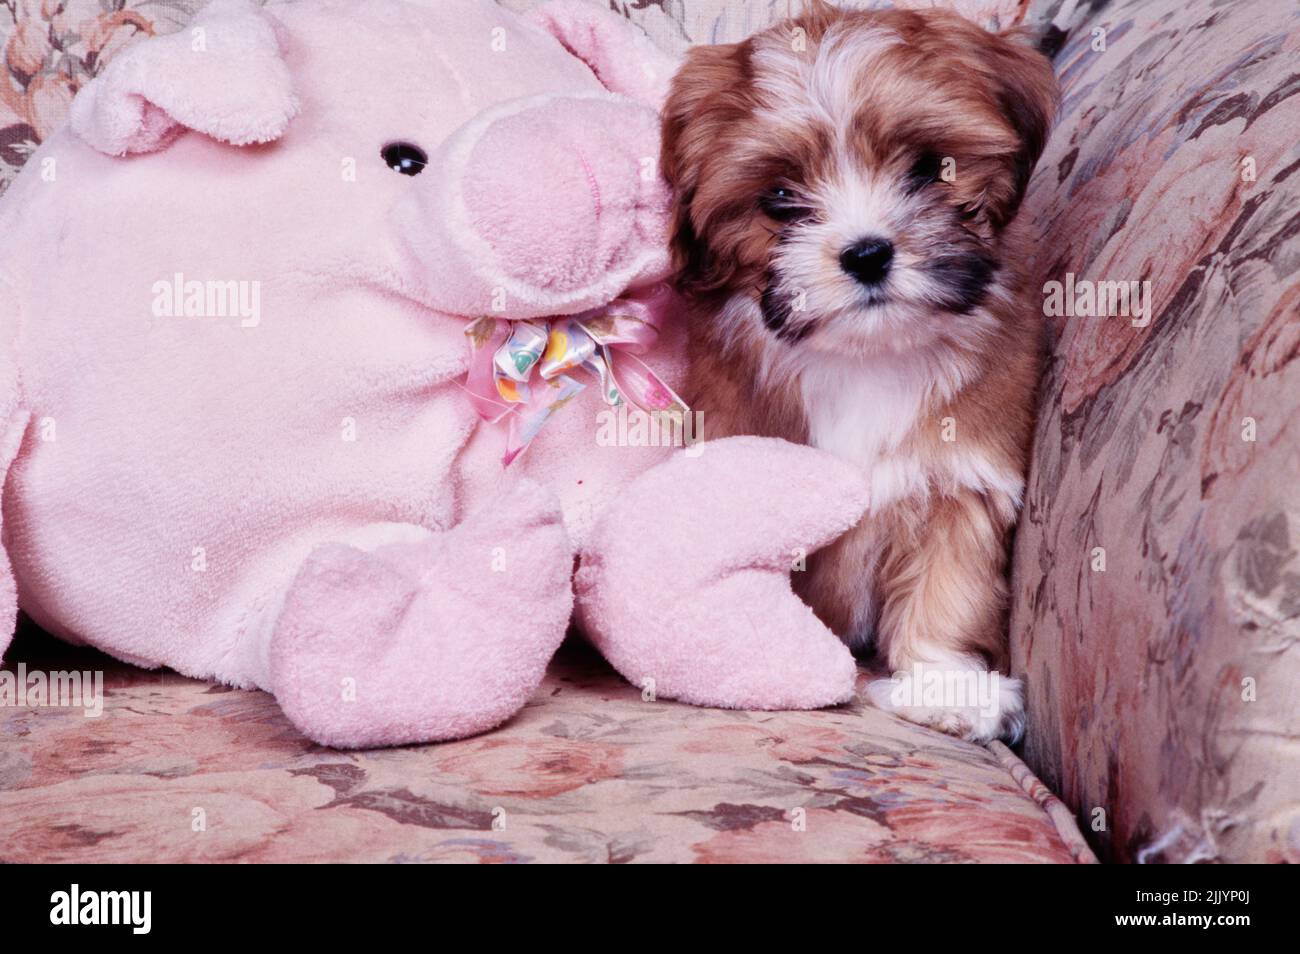 A Lhasa apso puppy on a couch with a pink stuffed toy Stock Photo